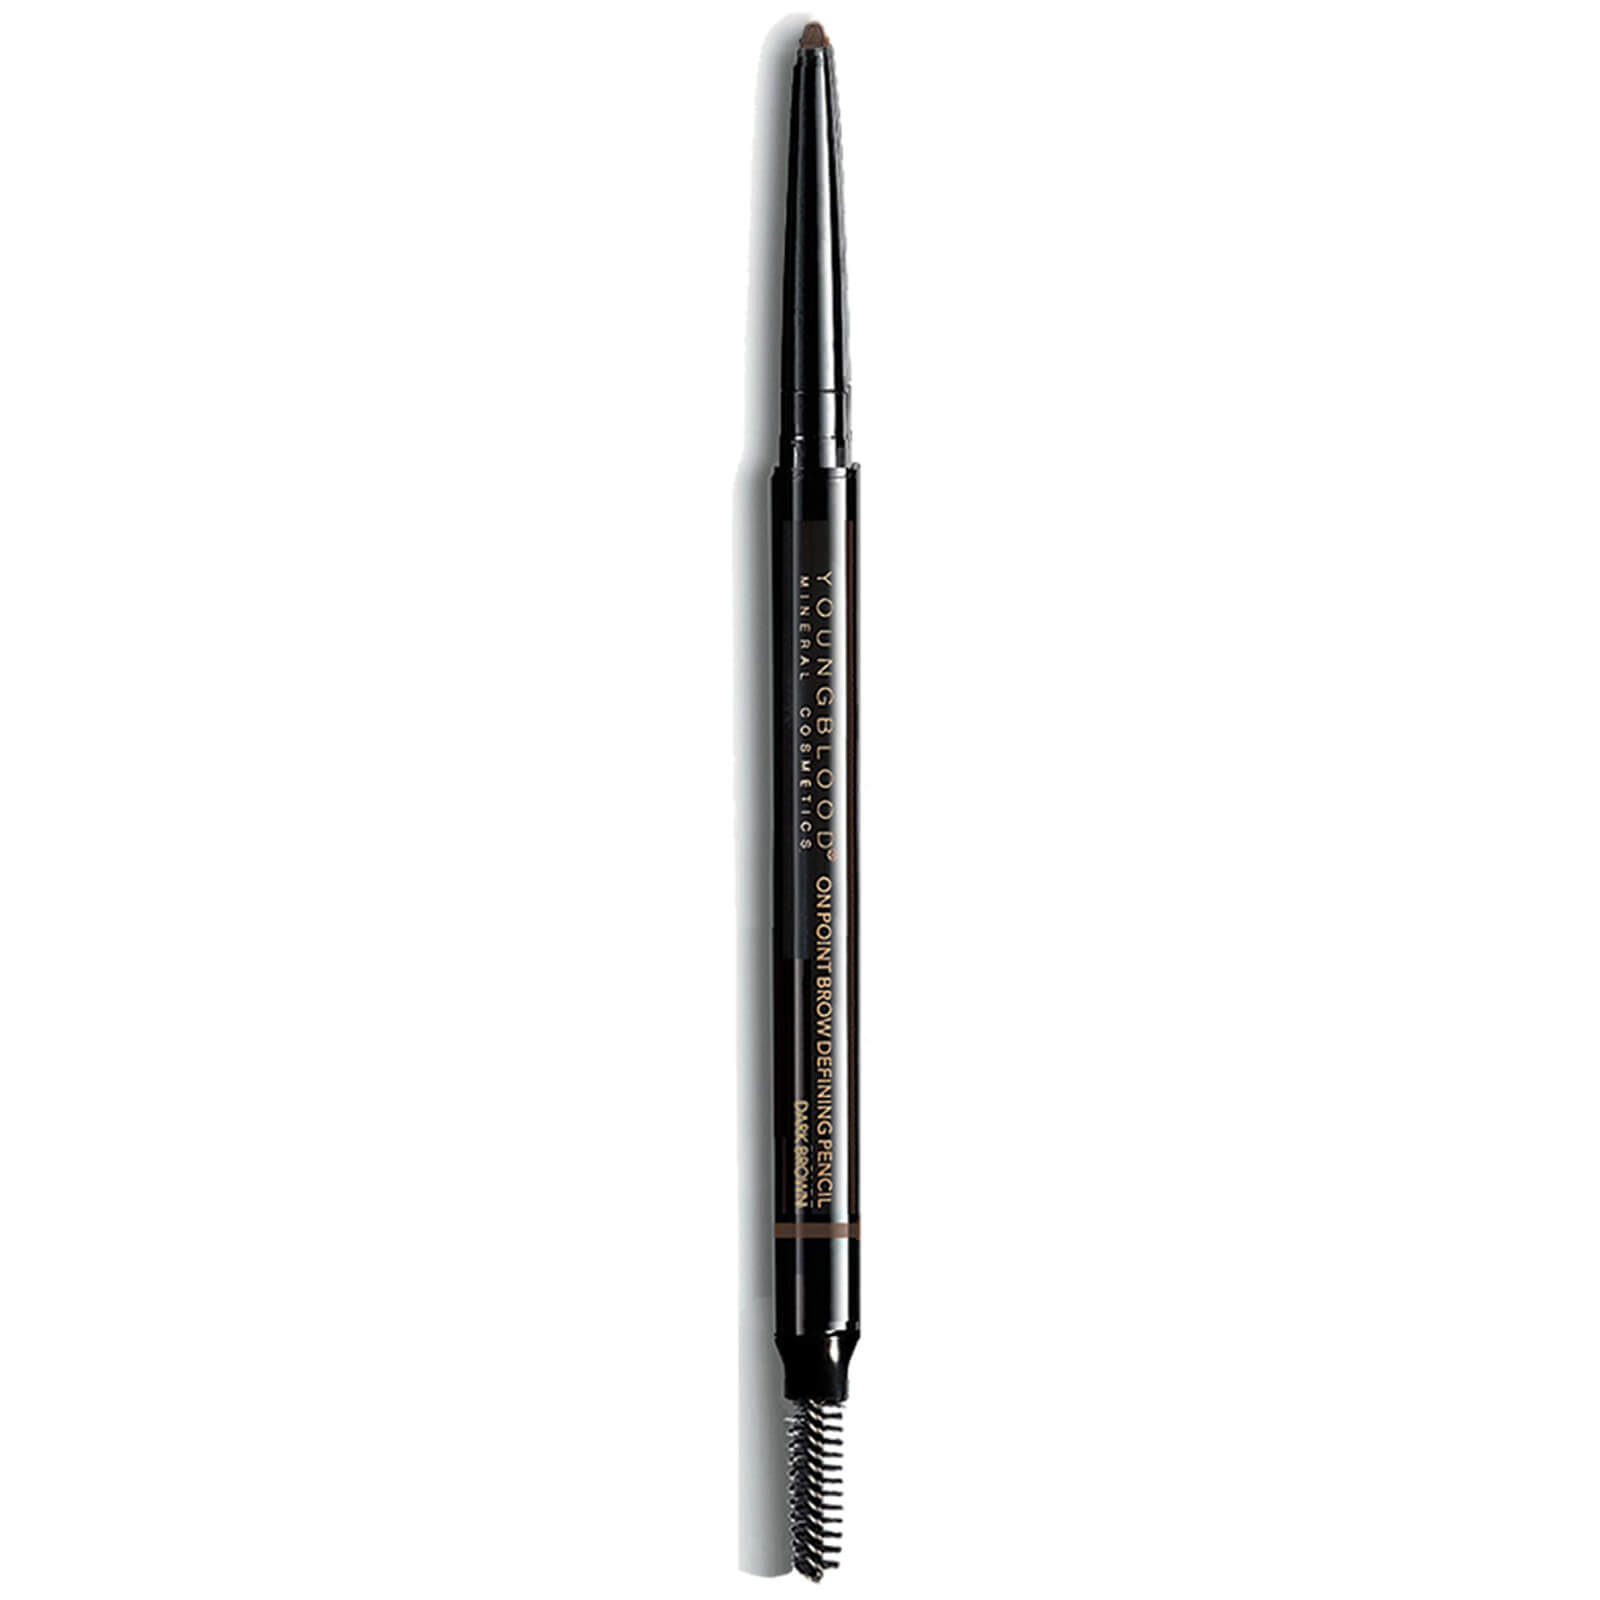 Youngblood On Point Brow Defining Pencil 0.35g (Various Shades) - Dark Brown